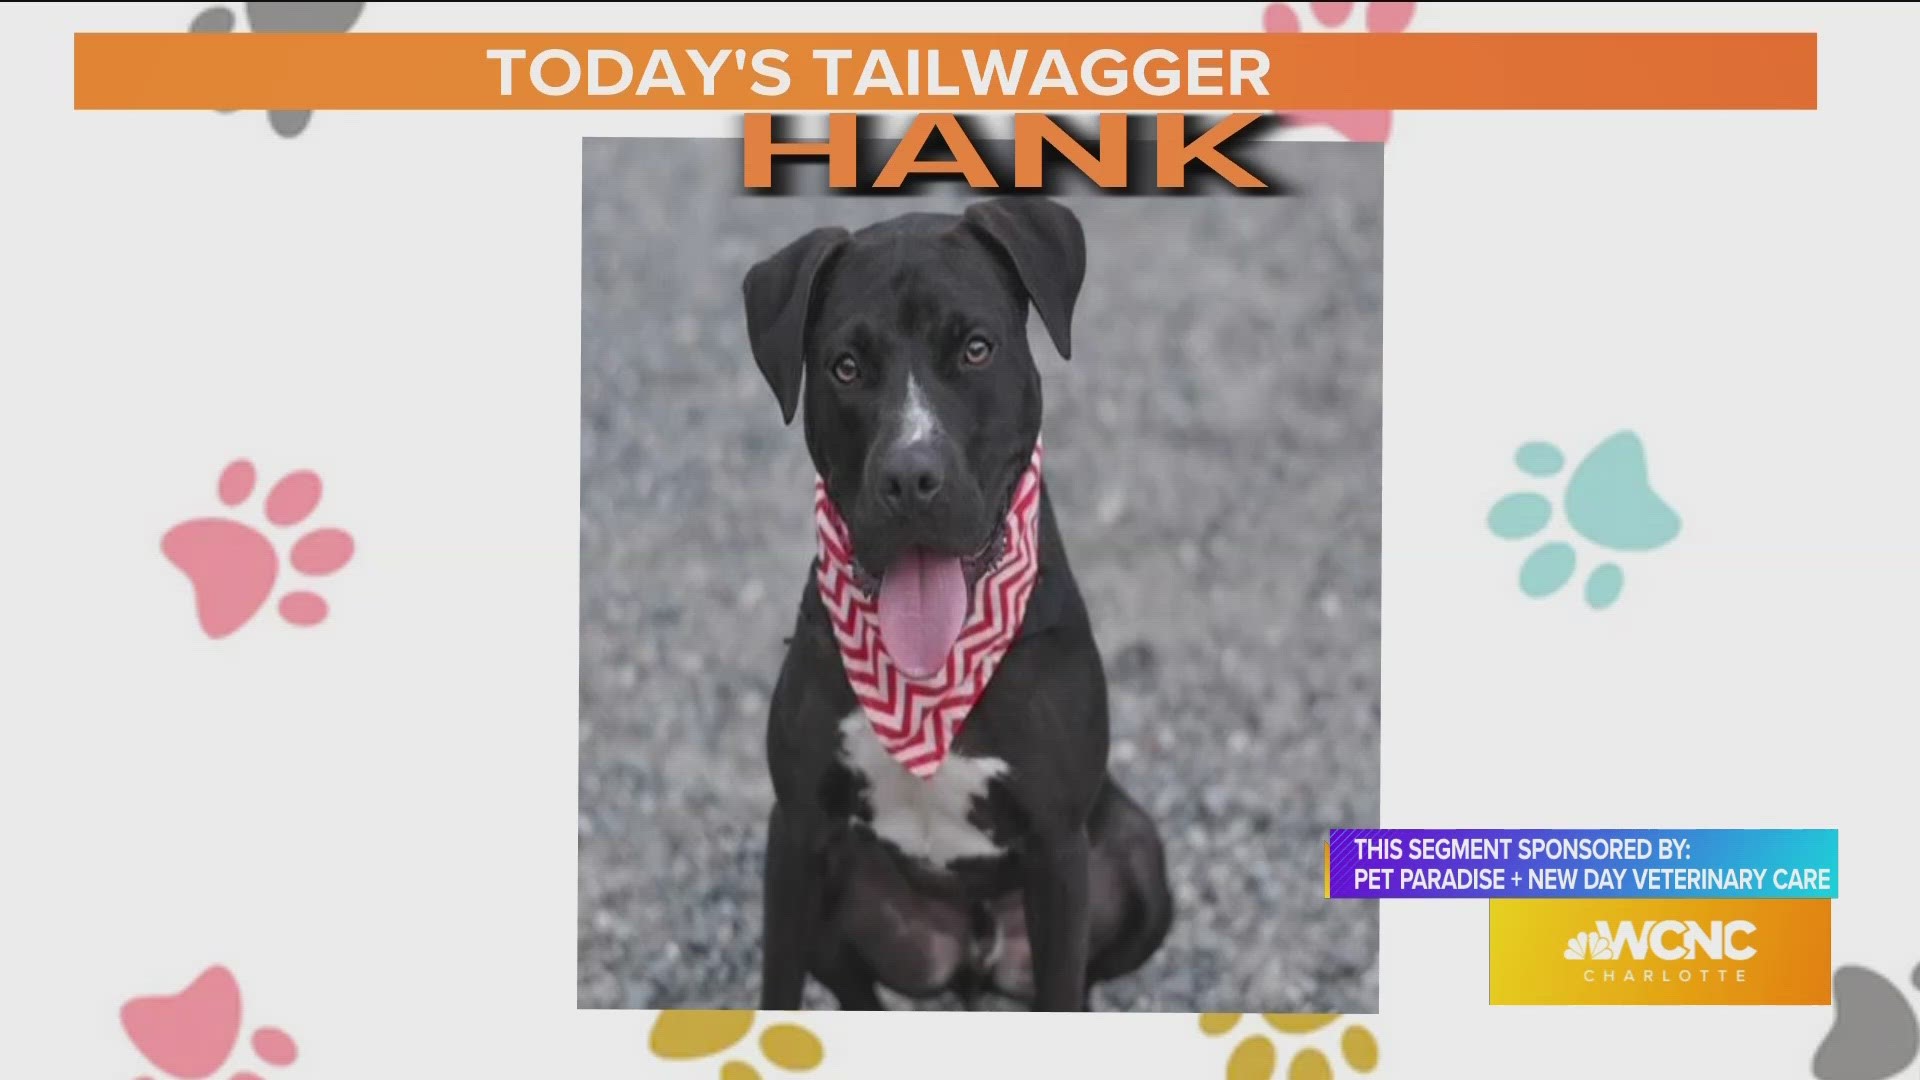 You can adopt Hank from Animal Care and Control